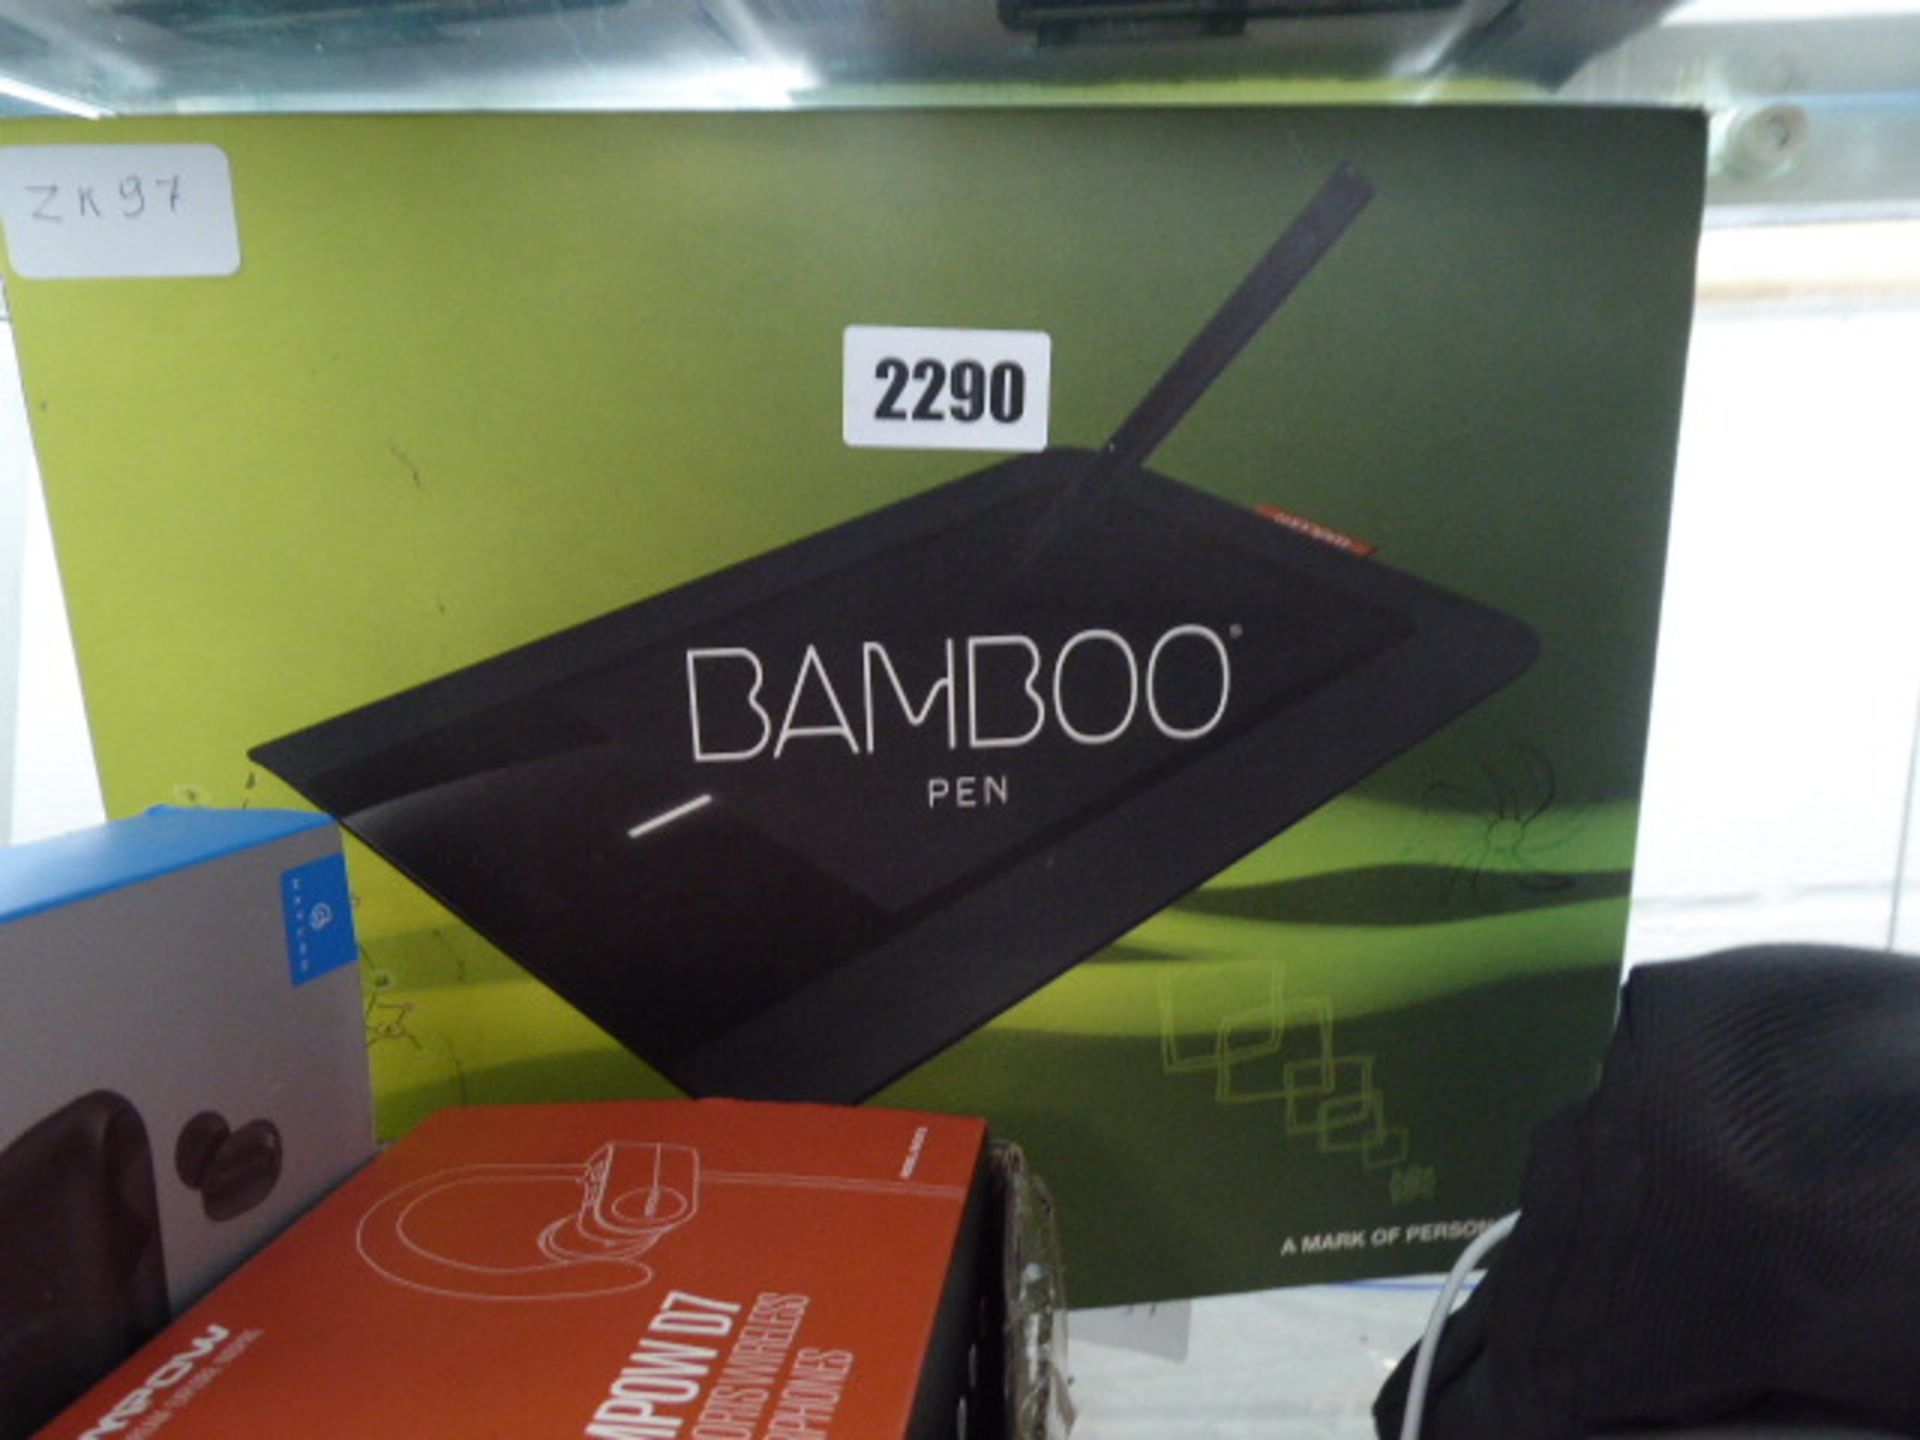 Bamboo pen graphics tablet kit in box